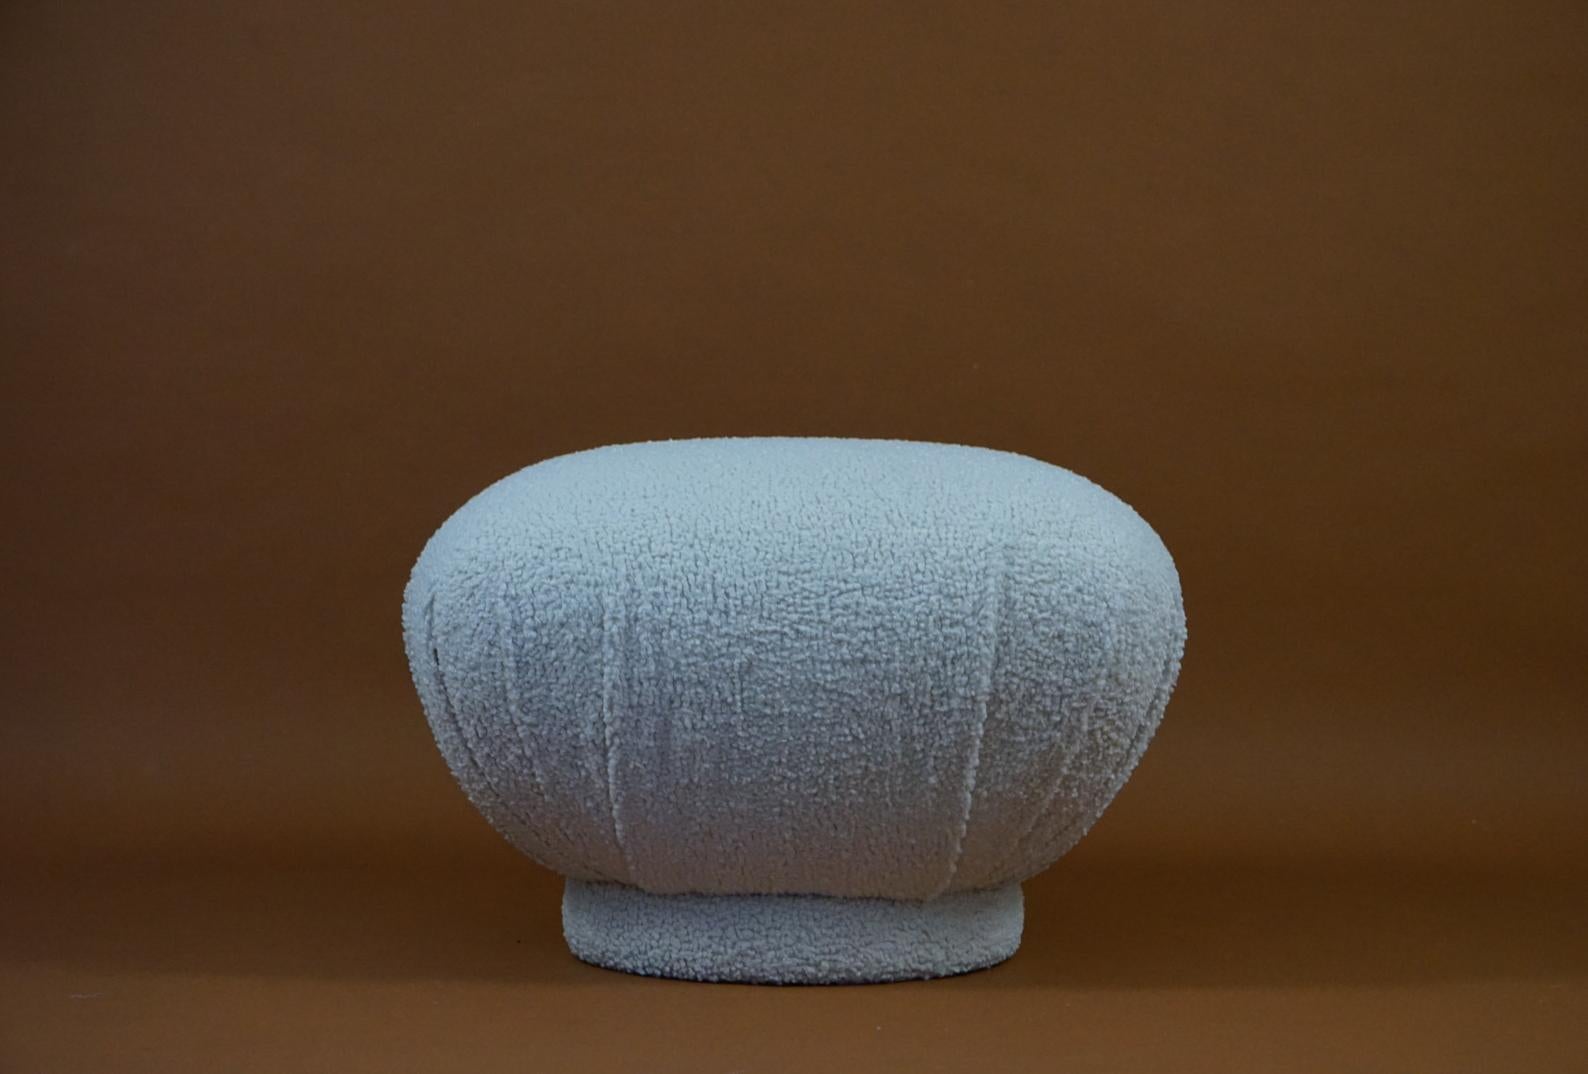 Classic Pouf - Ottoman from 1980s commonly attributed to Karl Springer, Vladimir Kagan, Milo Baughman or Steve Chase. This particular model didn't have any tags when purchased but is vintage from the 1980s and we have reupholstered in a beautiful